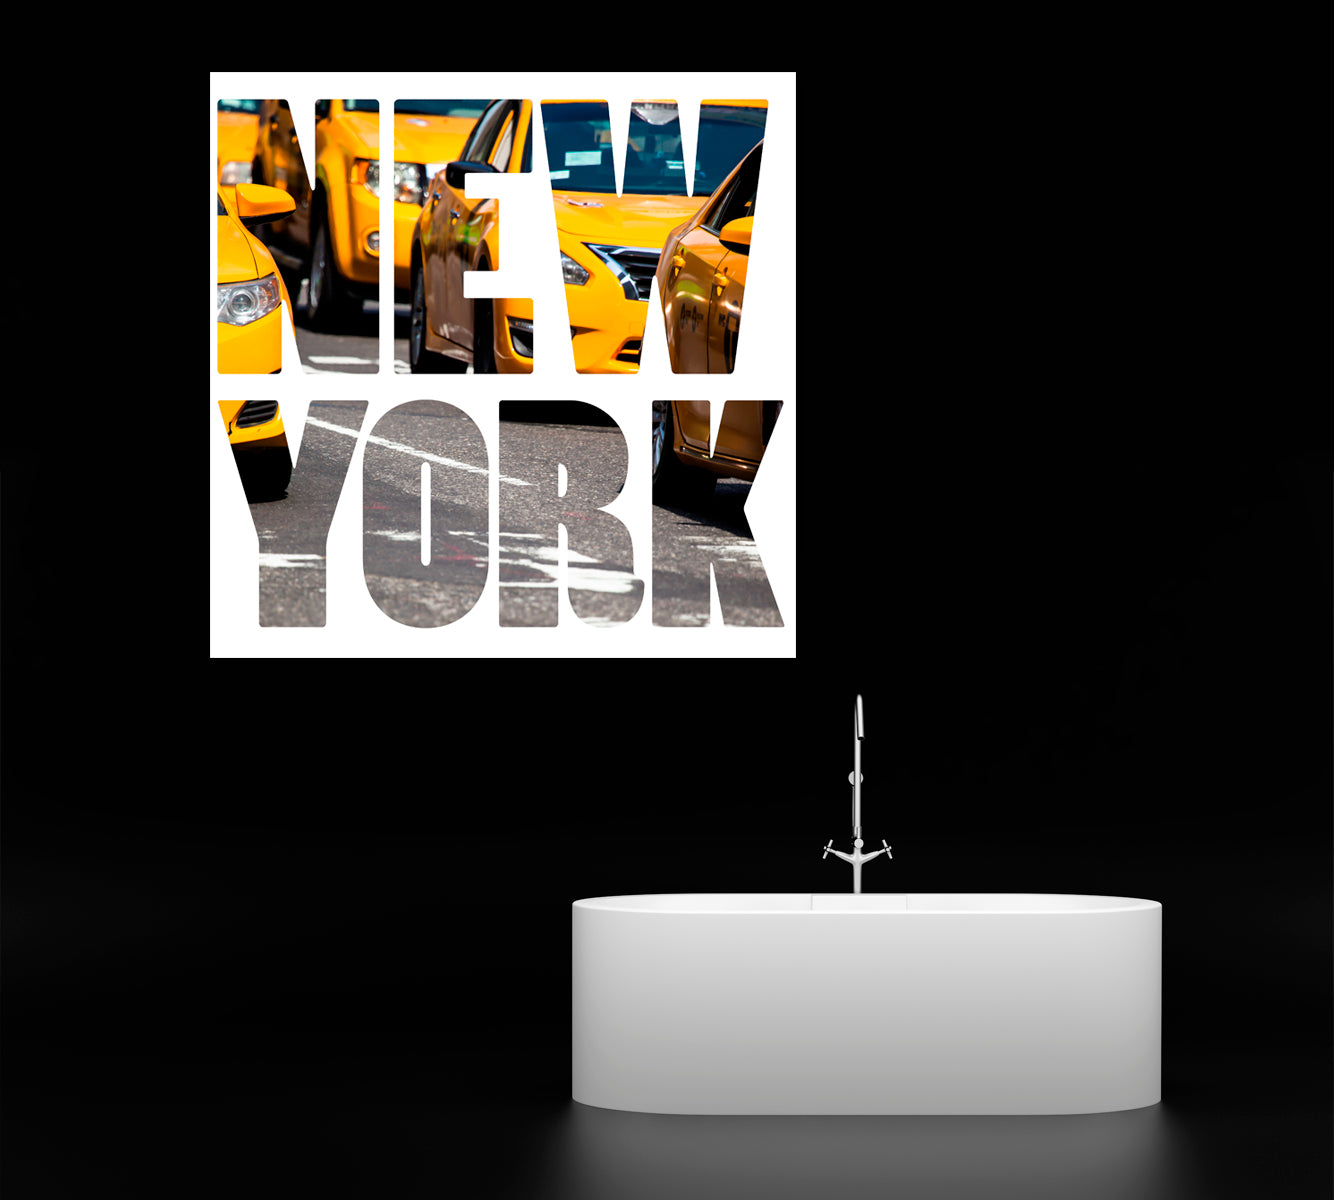 Yellow Cab Times Square New York Canvas Print ArtLexy   